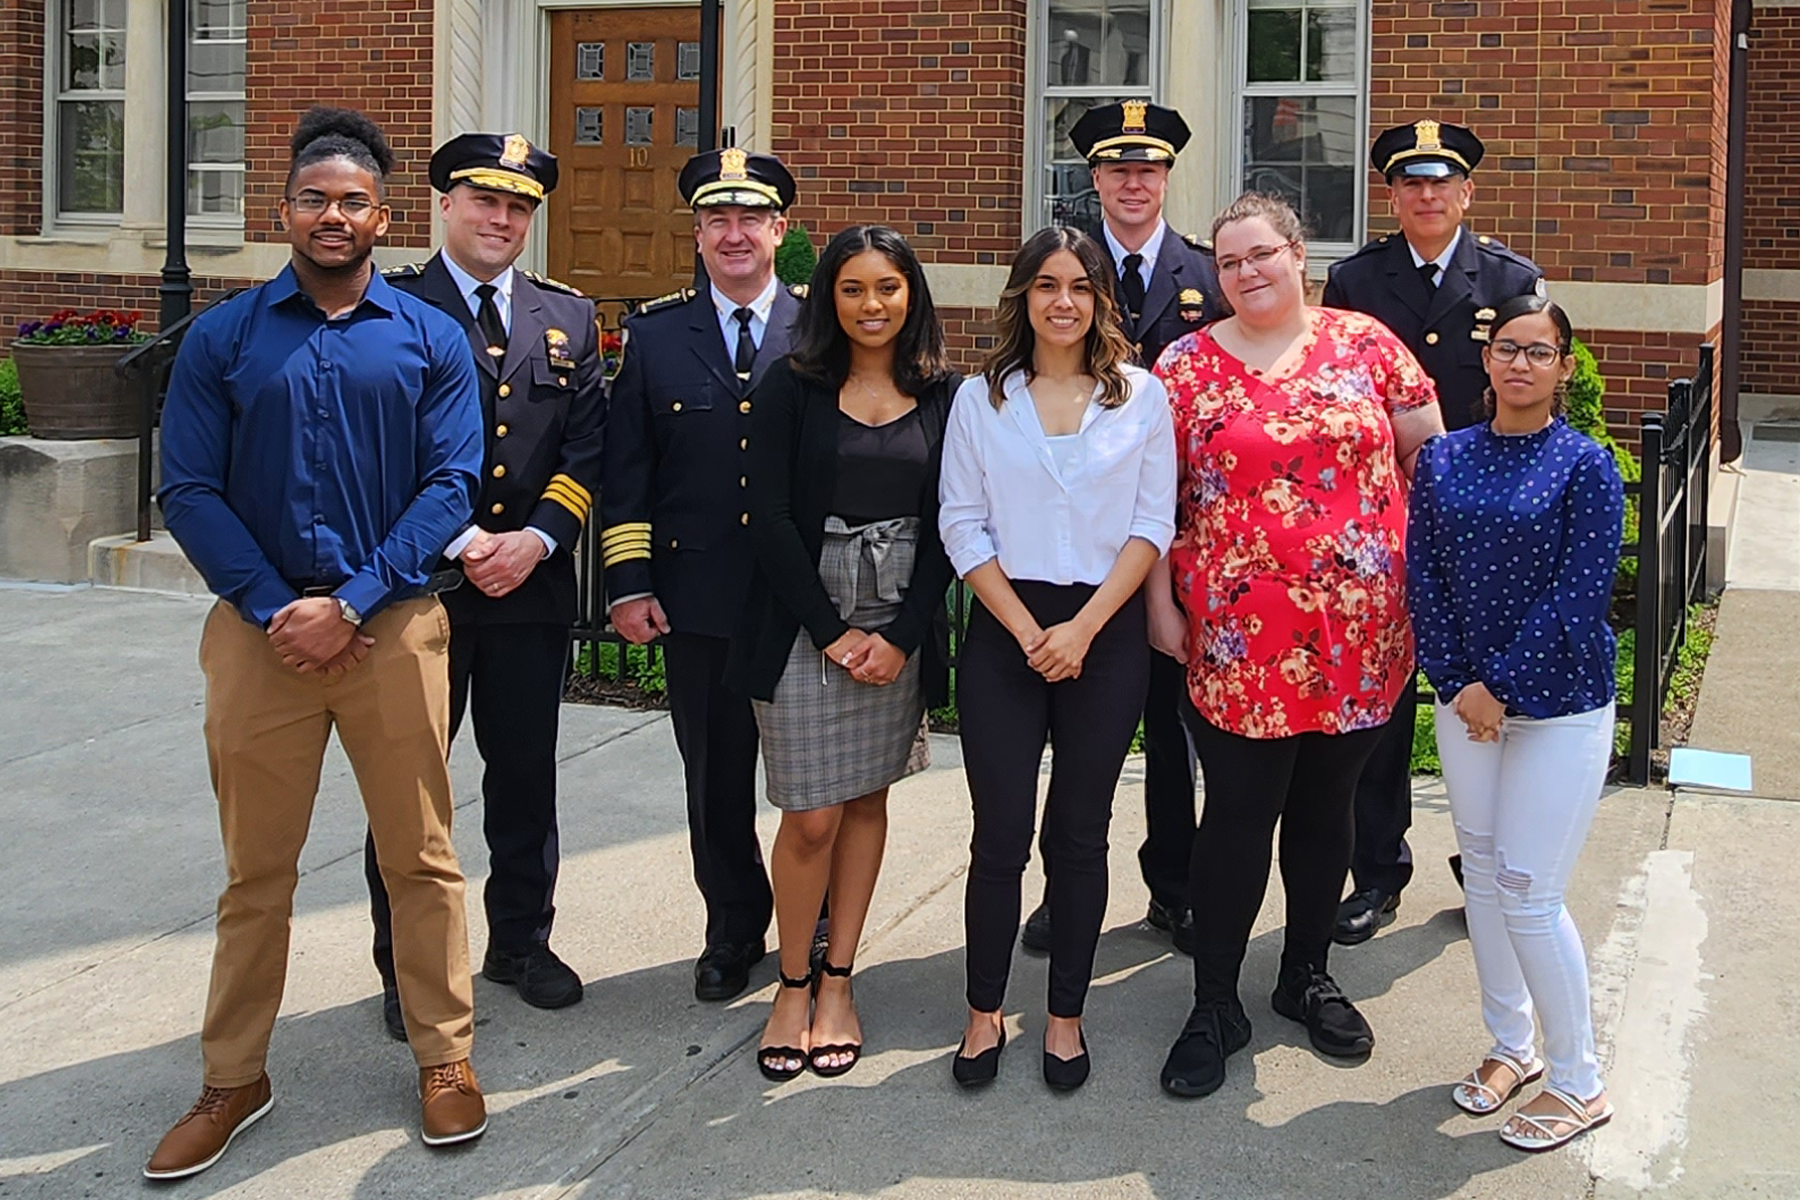 Criminal Justice students with law enforcement professionals outside during New York State Police Officers Memorial event